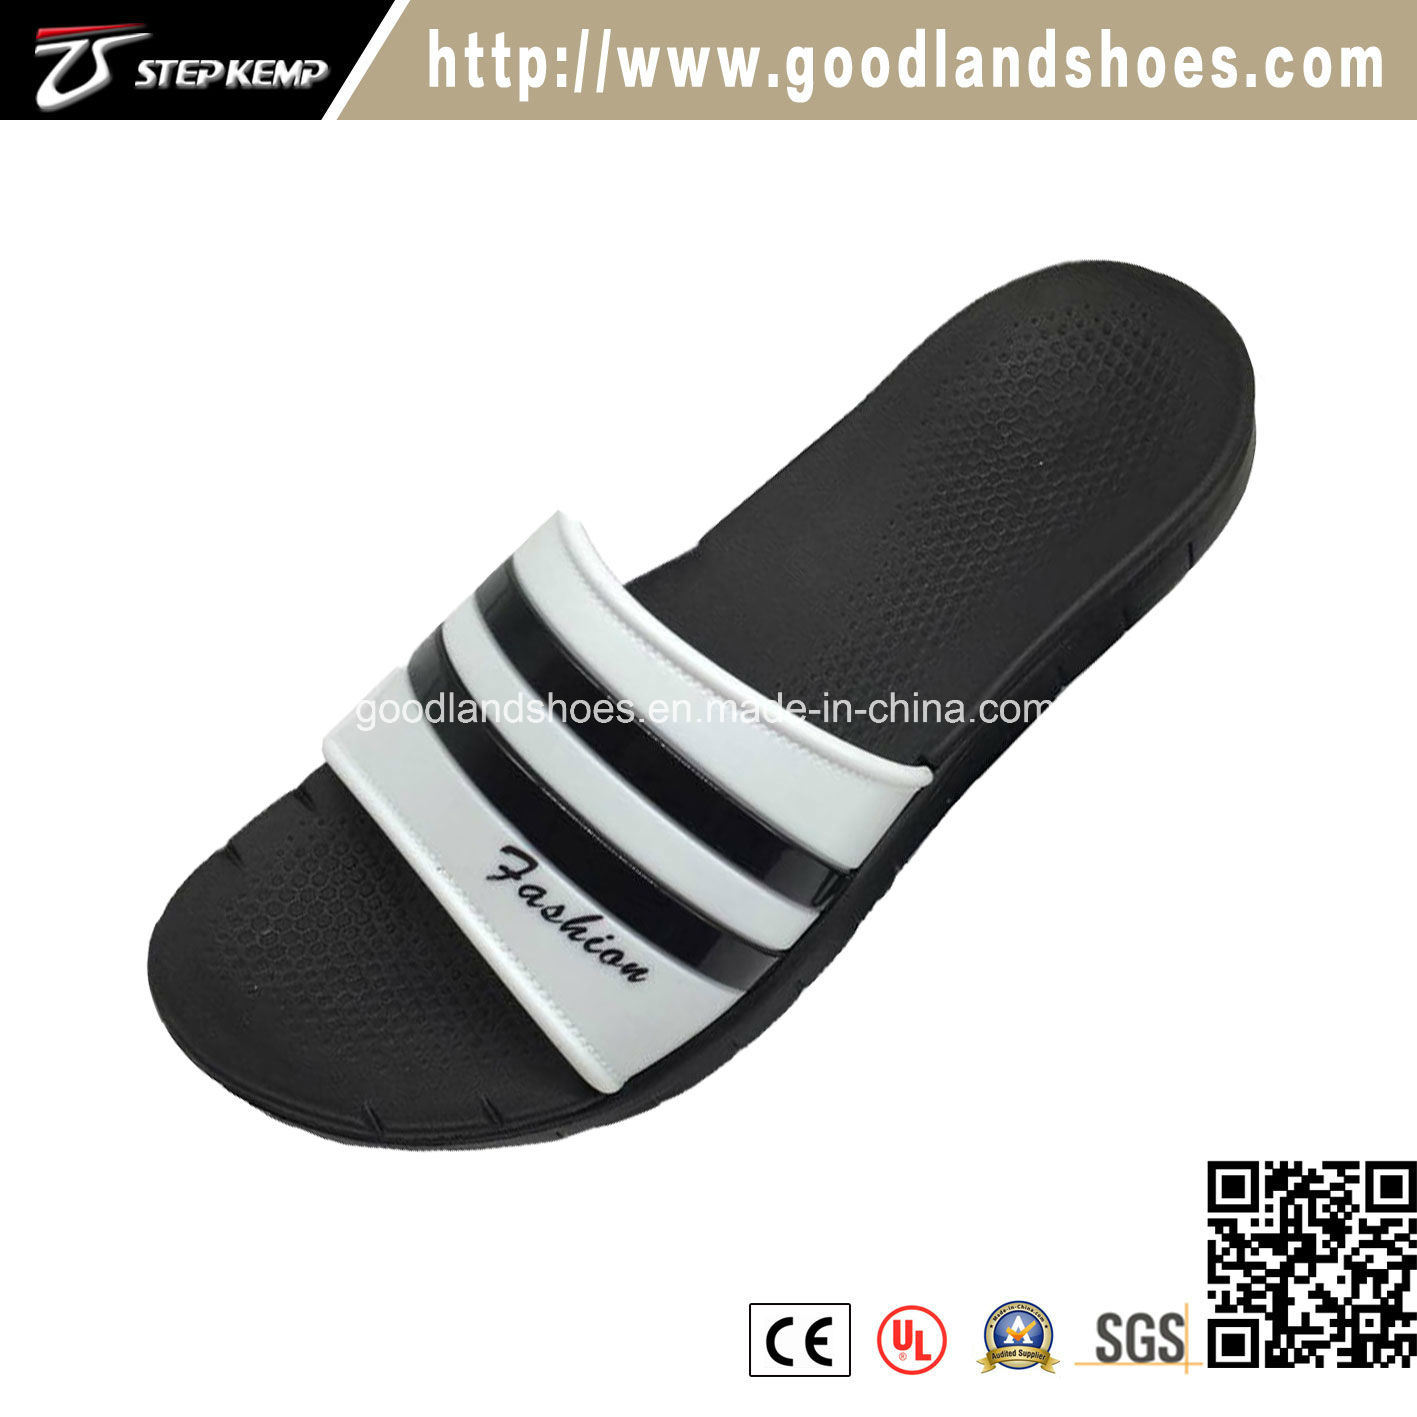 New Style Comfortable Indoor Beach Slipper with Cheap Price for Women 20187-6